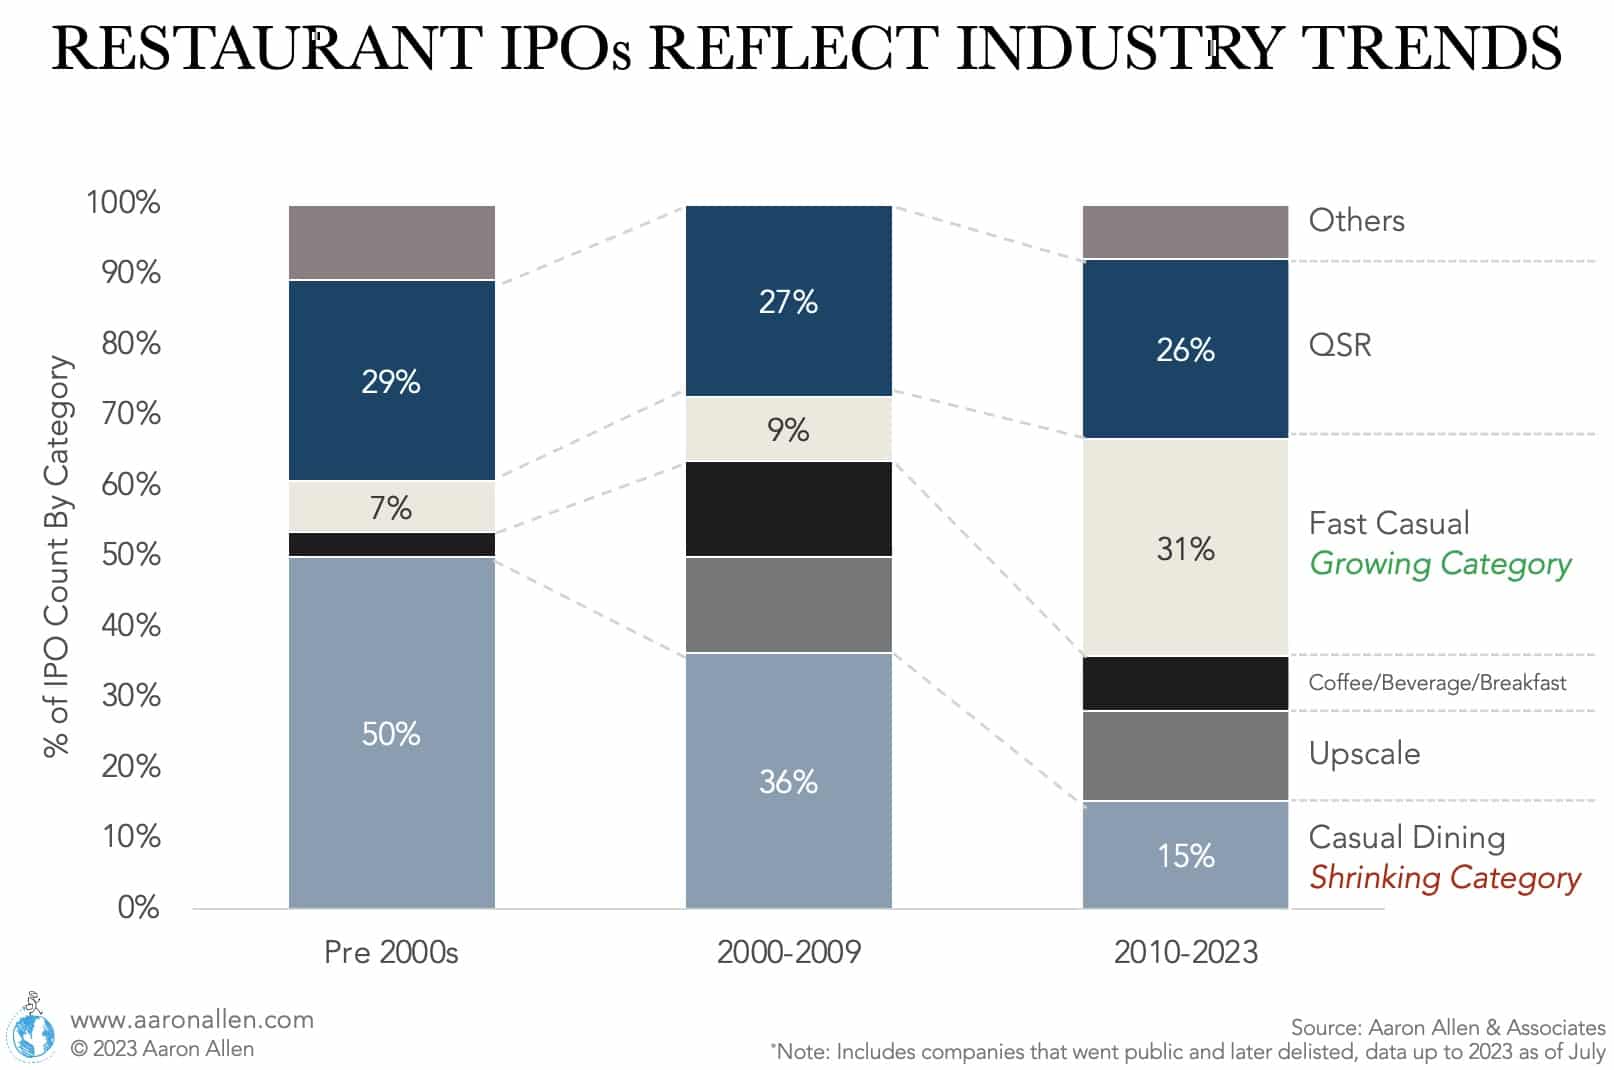 Bar chart with categorization for IPOs as casual dining, upscale, coffee, fast-casual, QSR, and others